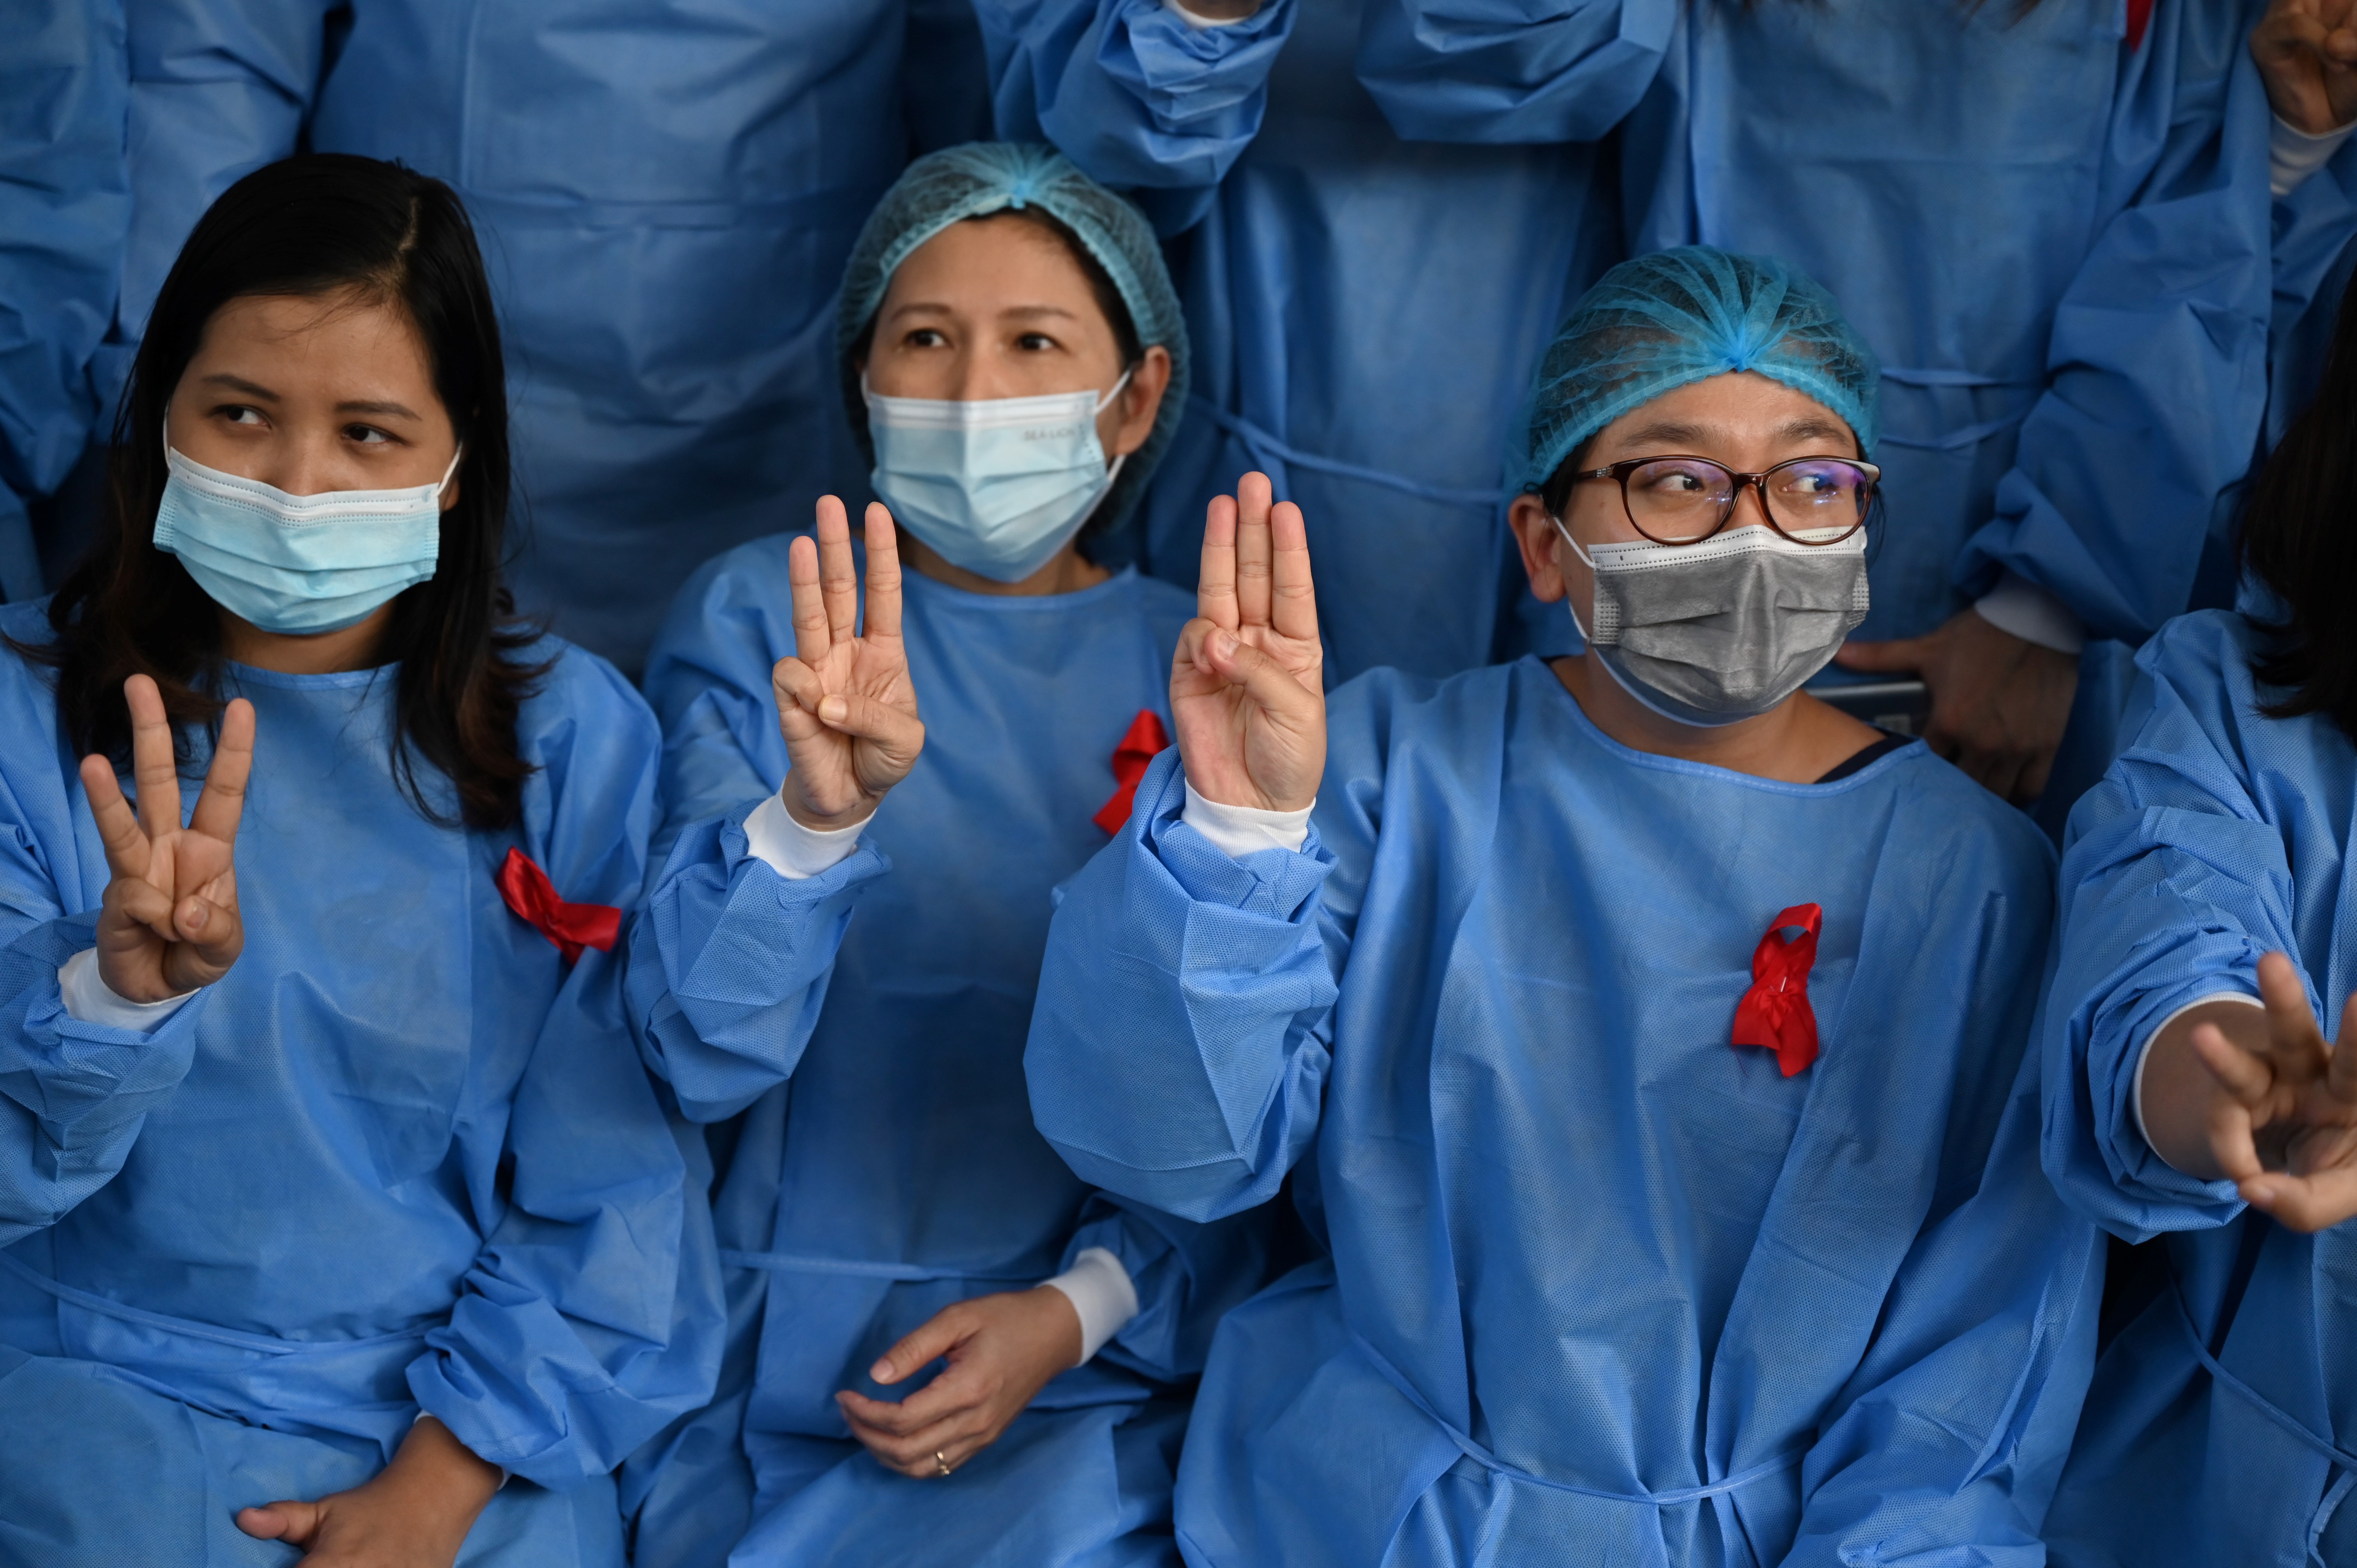 Medical staff at the Yangon General Hospital wear red ribbons and display the three finger salute, a sign of protest popularised by protesters in neighboring Thailand. (PHOTO: AFP, STRINGER)